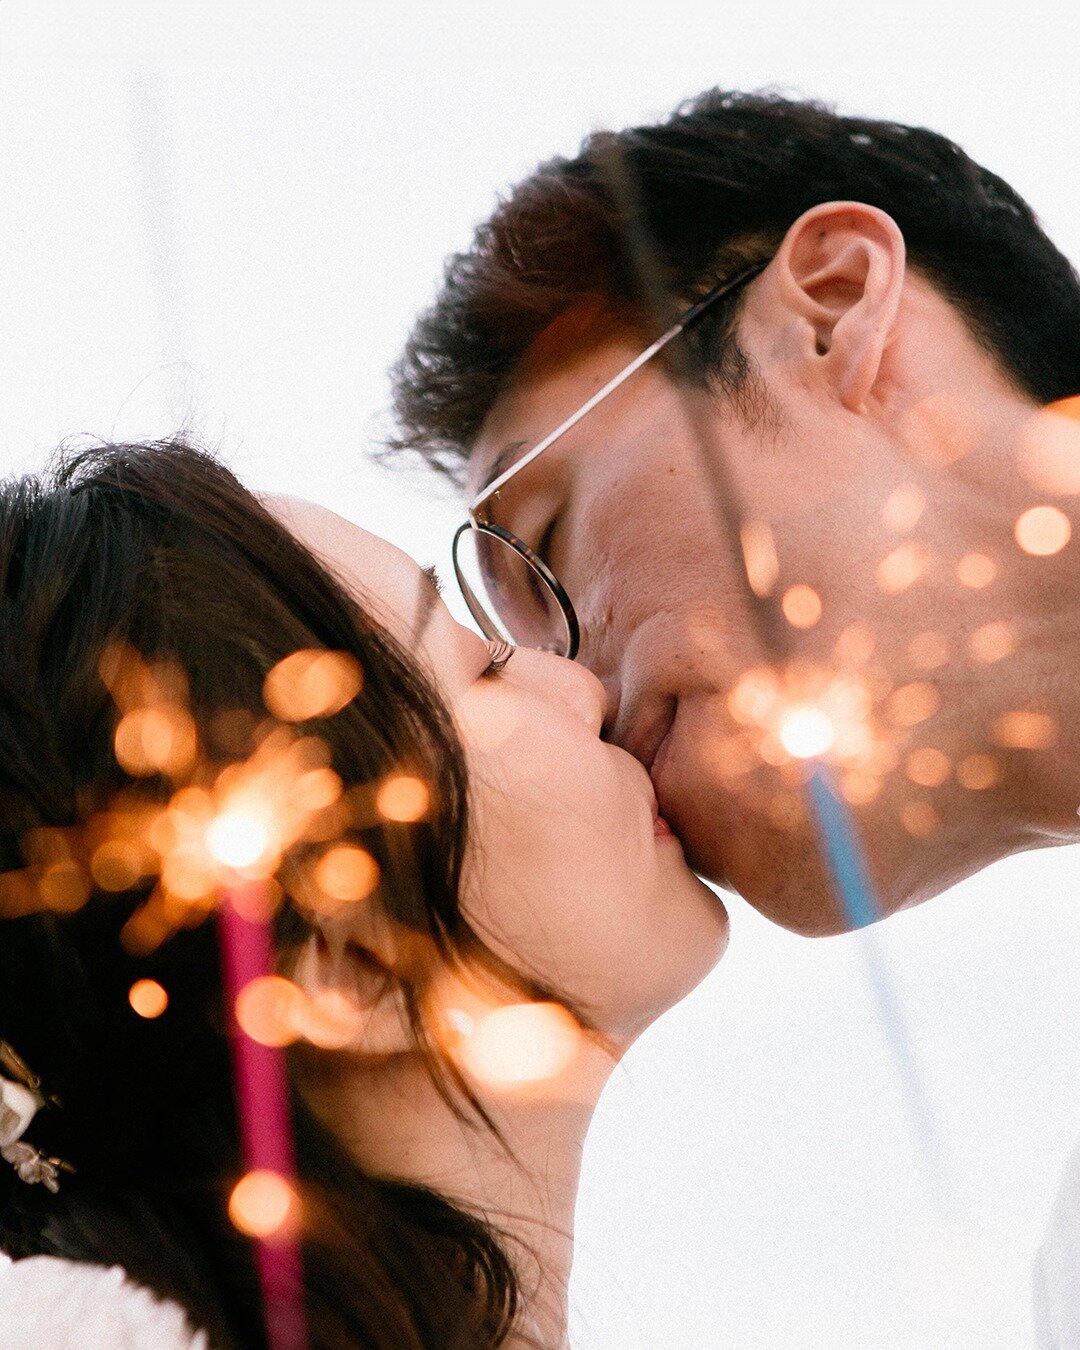 with every long walk on the beach, kris and shijie discover new treasures in each other's hearts as they explore the depths of love by the ocean's edge 🌊❤️ 
.
for more info on our 2024 pre wedding packages, reach out to us by sending us a direct mes